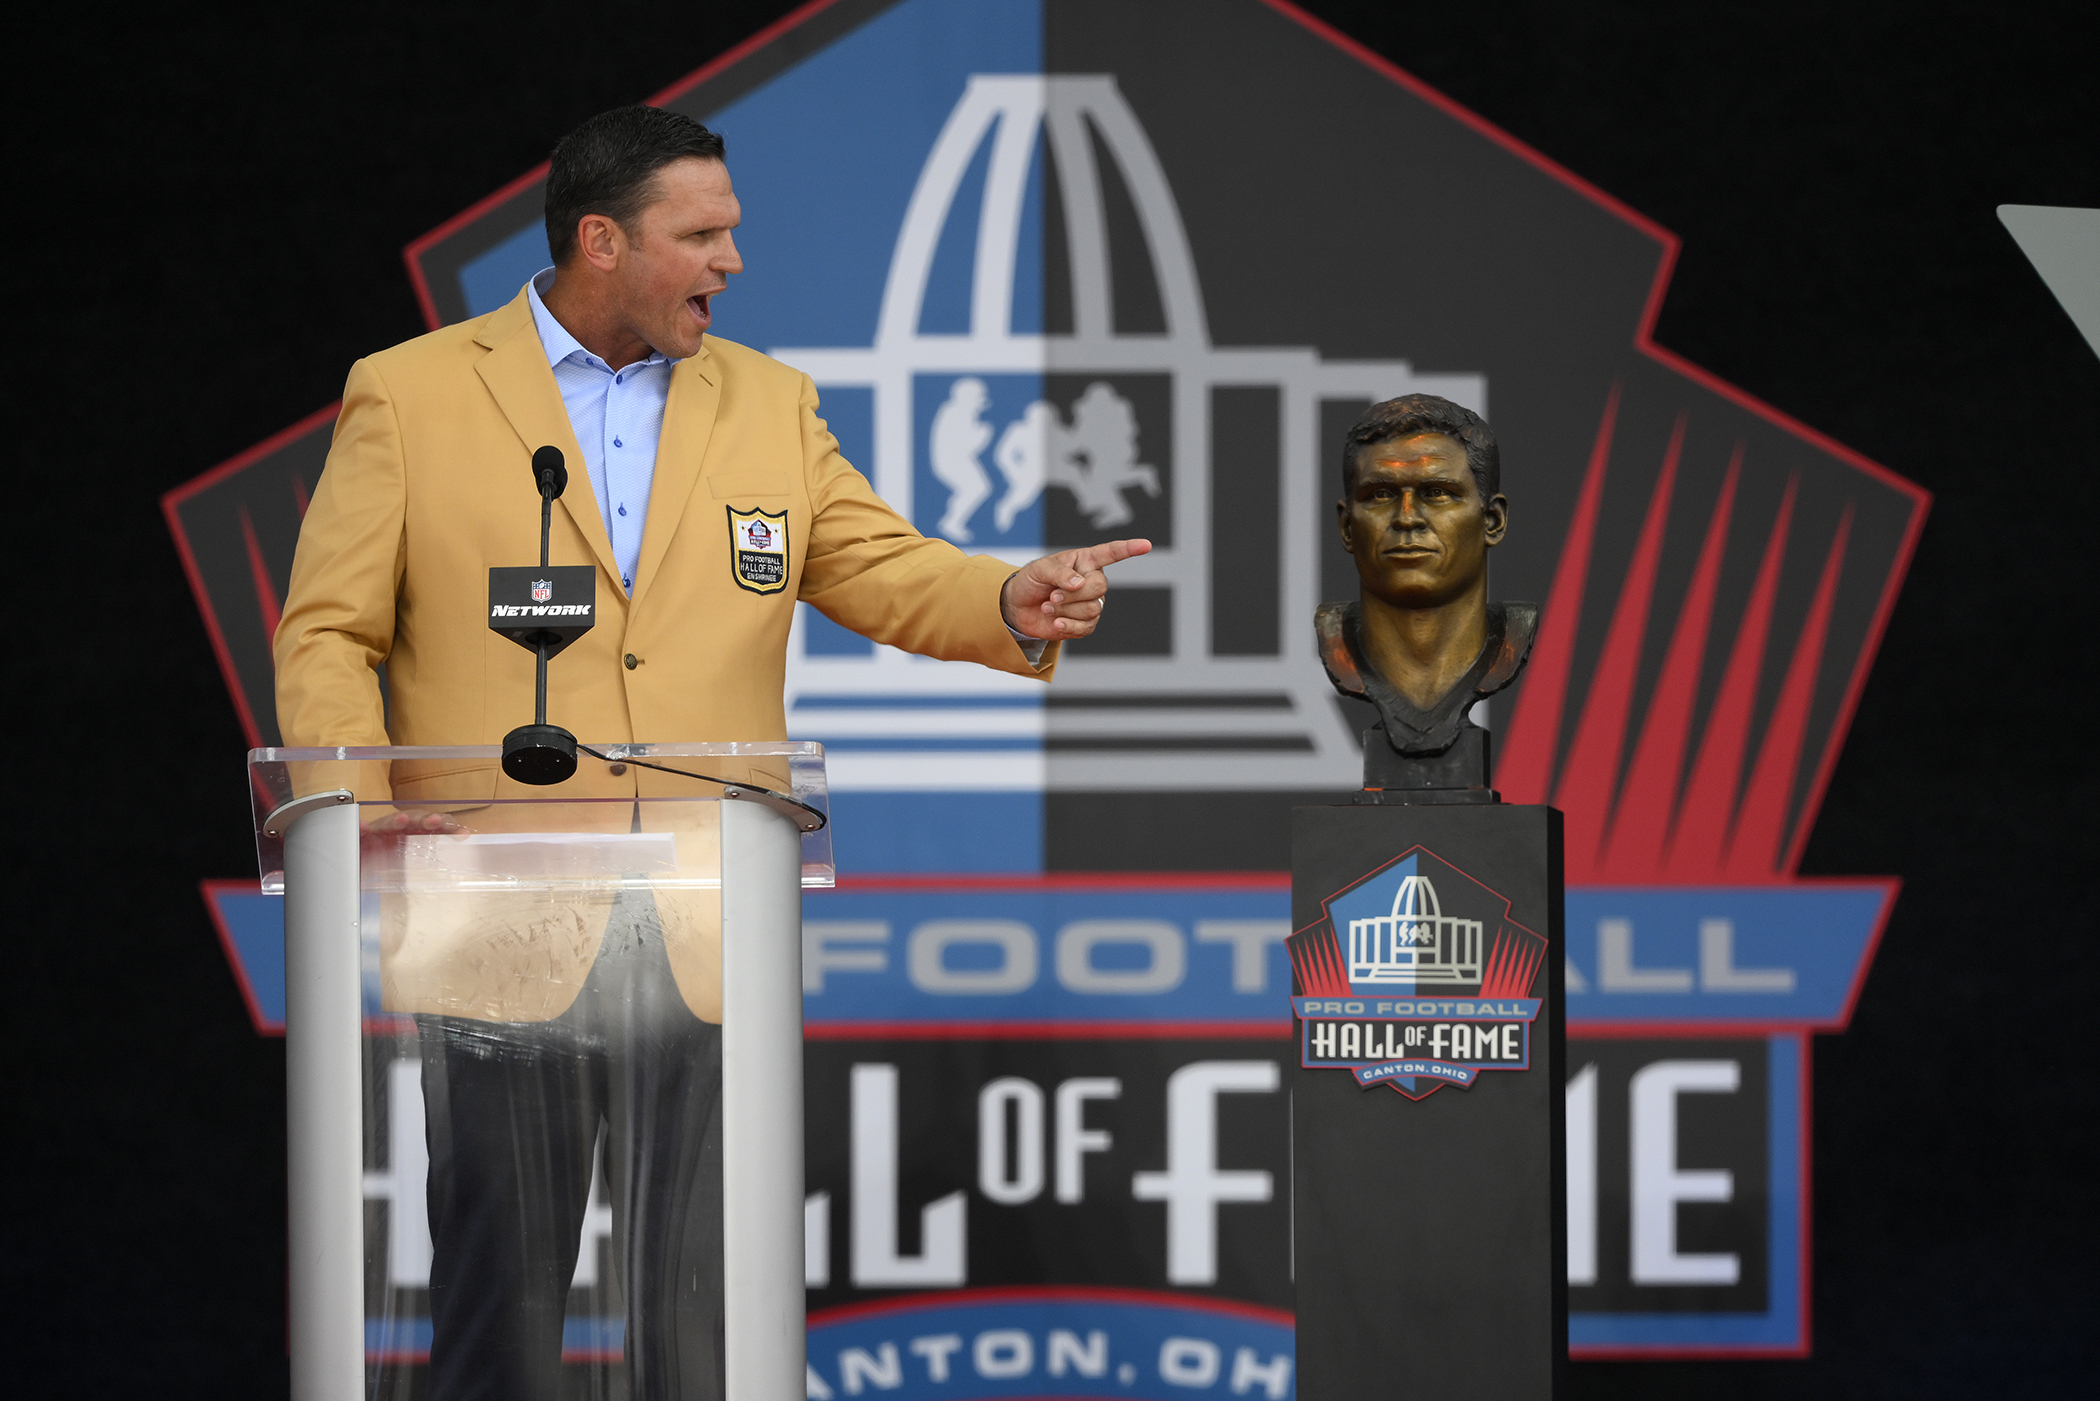 NFL's Hall of Fame inductees 2022: Who made the Pro Football Hall of Fame  class this year?